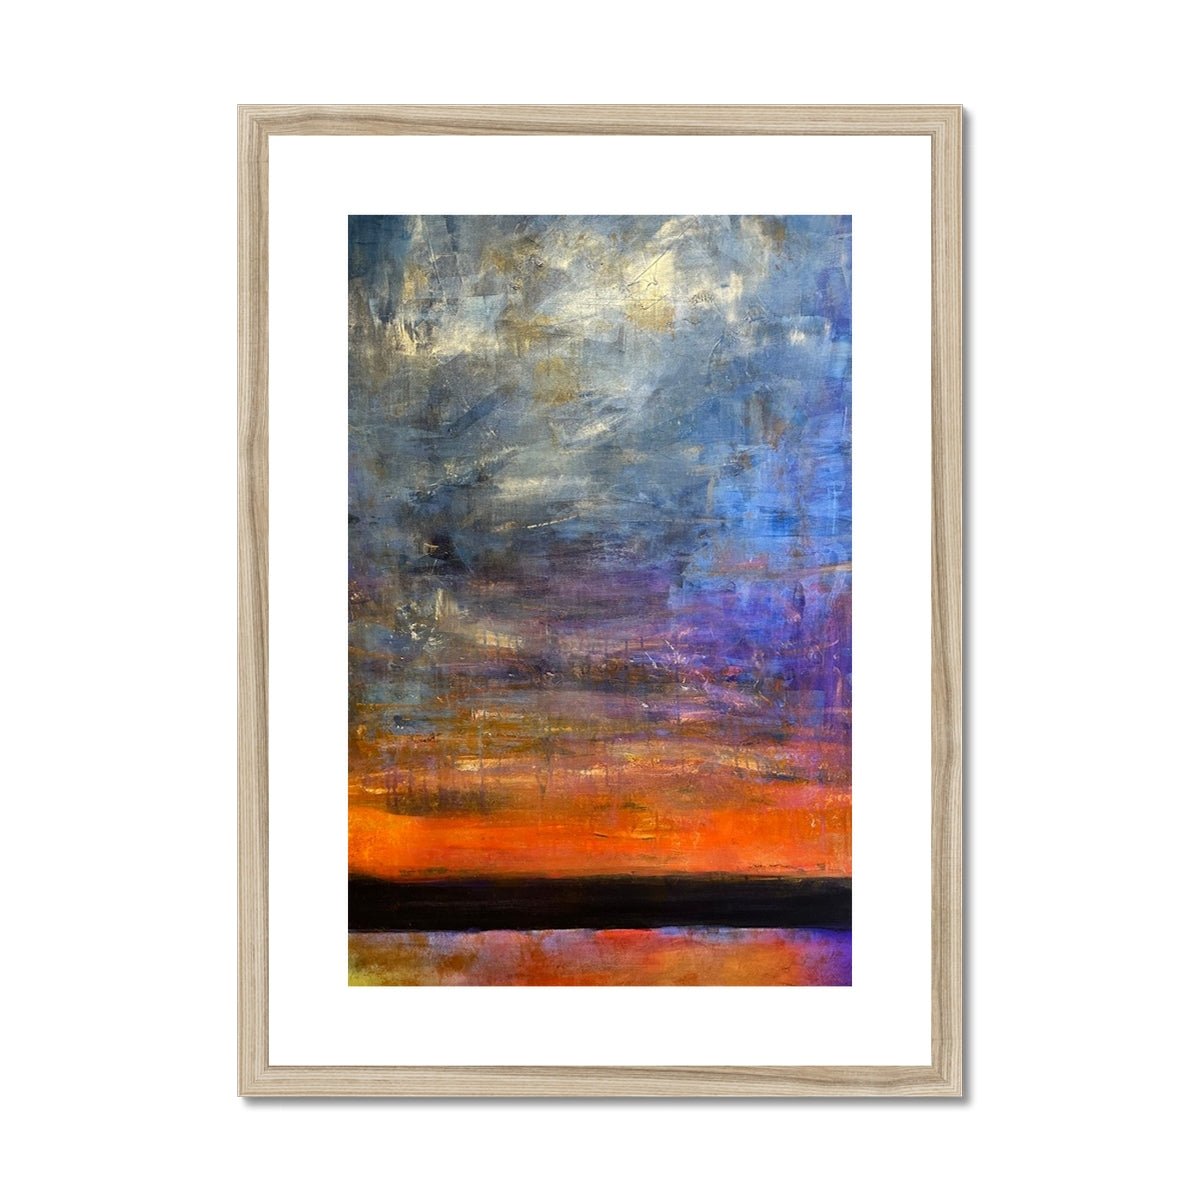 Horizon Dreams Abstract Painting | Framed & Mounted Prints From Scotland-Framed & Mounted Prints-Abstract & Impressionistic Art Gallery-A2 Portrait-Natural Frame-Paintings, Prints, Homeware, Art Gifts From Scotland By Scottish Artist Kevin Hunter